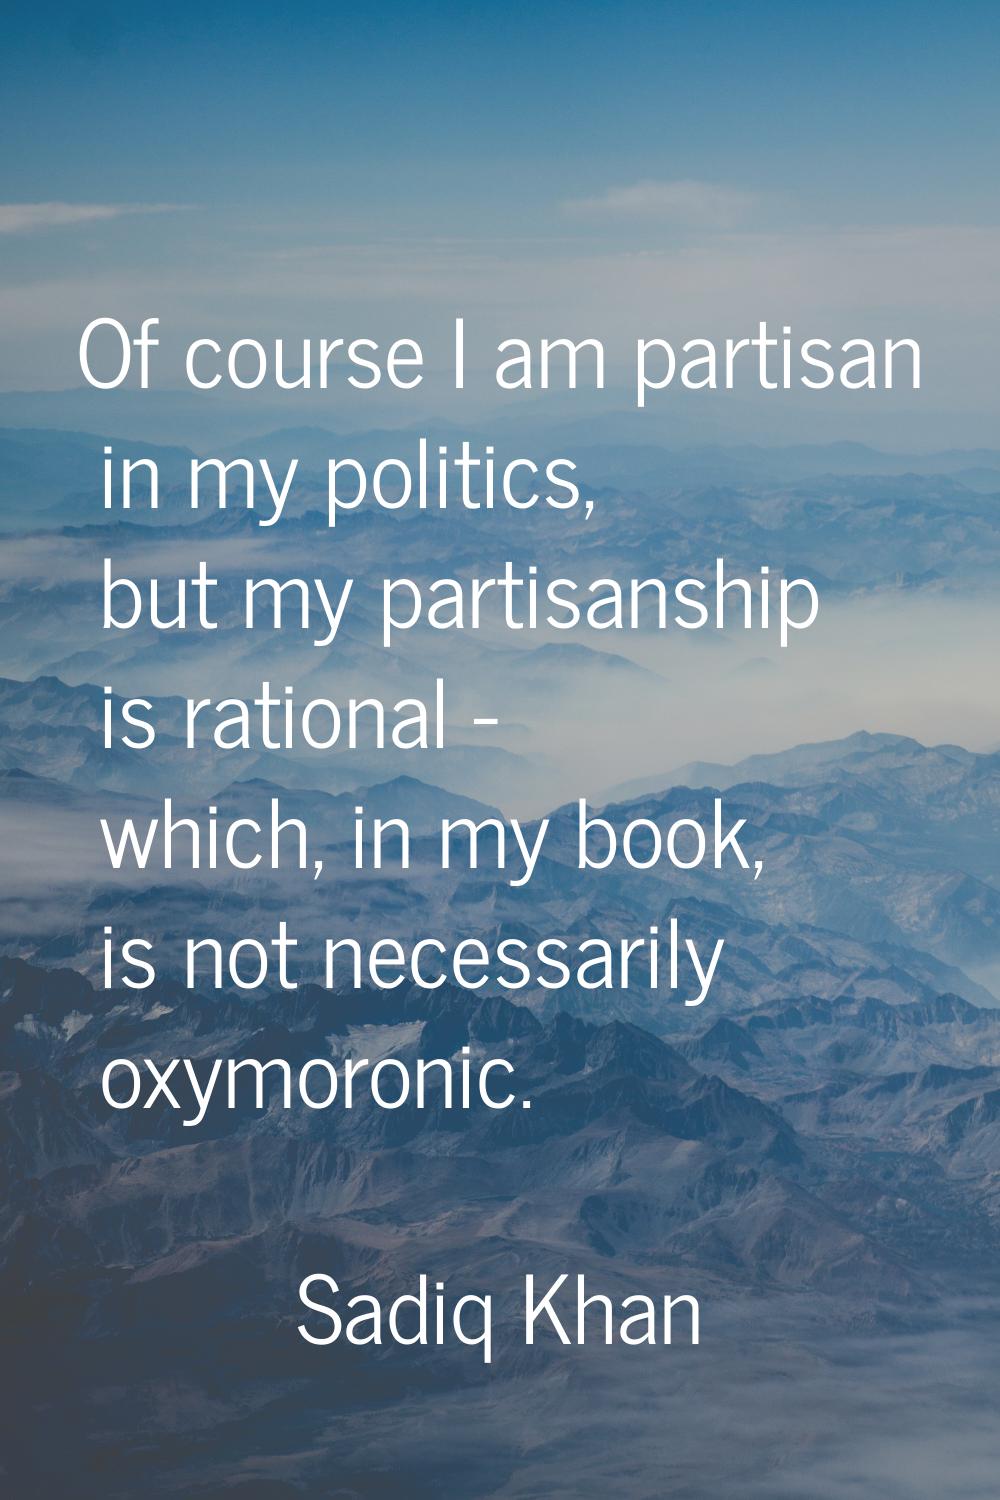 Of course I am partisan in my politics, but my partisanship is rational - which, in my book, is not